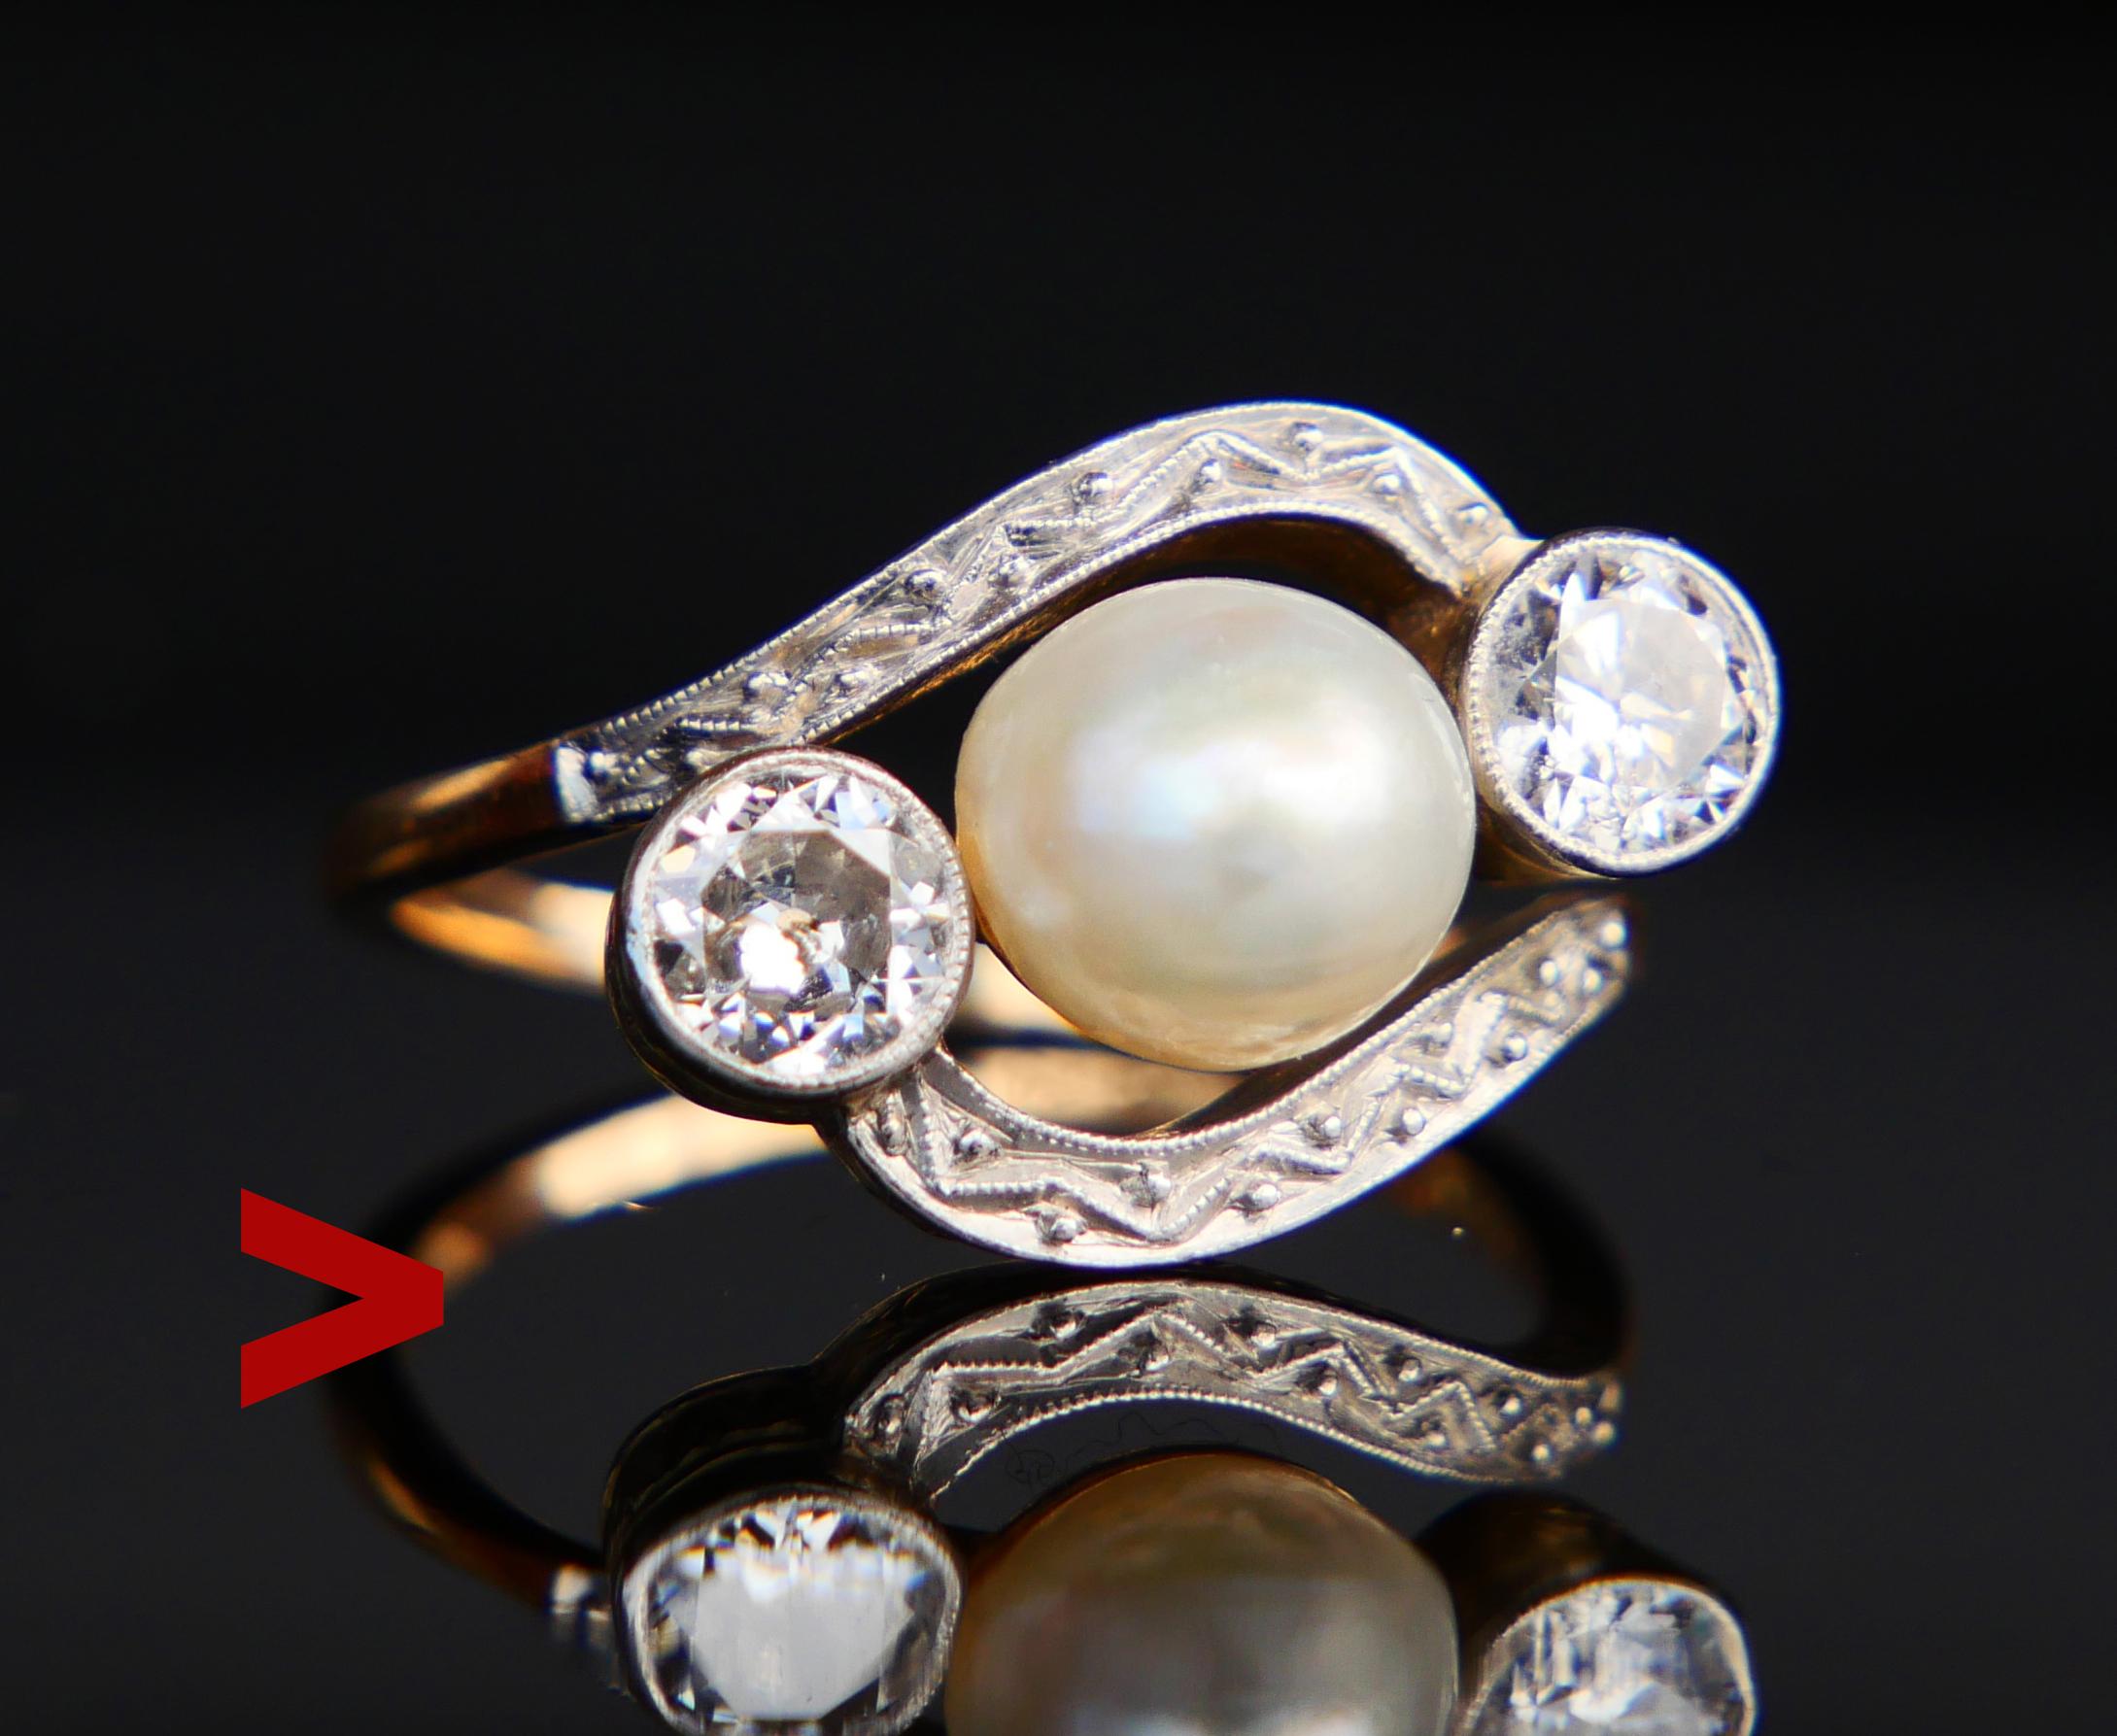 A ring from 1920s - 1930s, Art - Deco period, very likely German. Band hallmarked 585. 

Crown is 17 mm x 12 mm long x 7 mm deep. Top of crown in 14K White Gold or Platinum.

Large Mabe or Natural Pearl Ø 7mm in finest condition with silky luster is